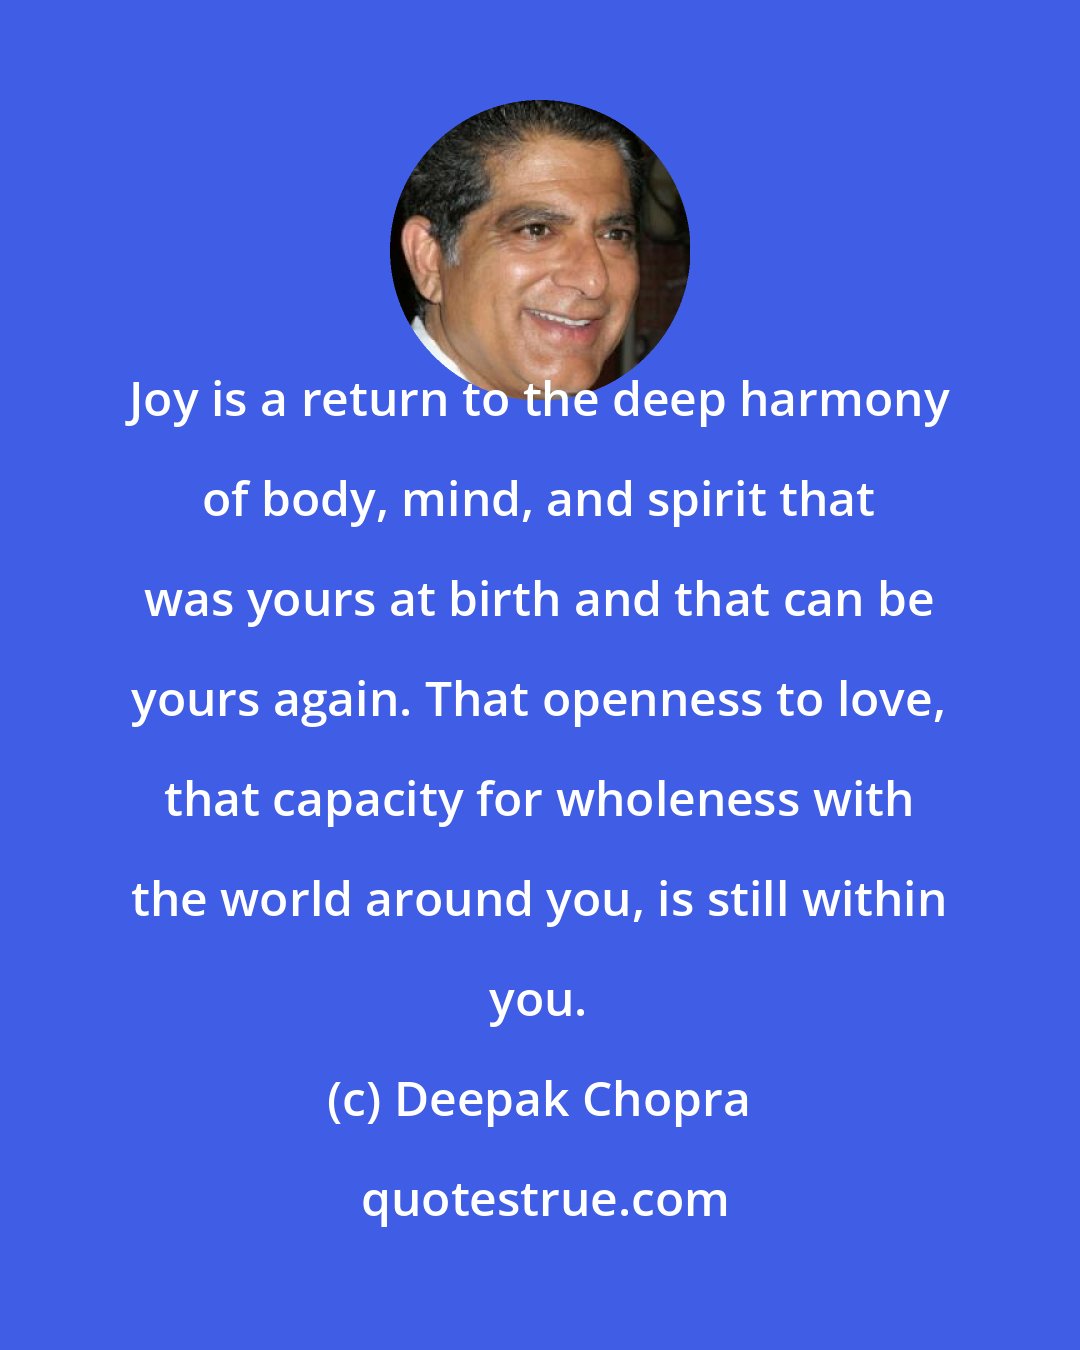 Deepak Chopra: Joy is a return to the deep harmony of body, mind, and spirit that was yours at birth and that can be yours again. That openness to love, that capacity for wholeness with the world around you, is still within you.